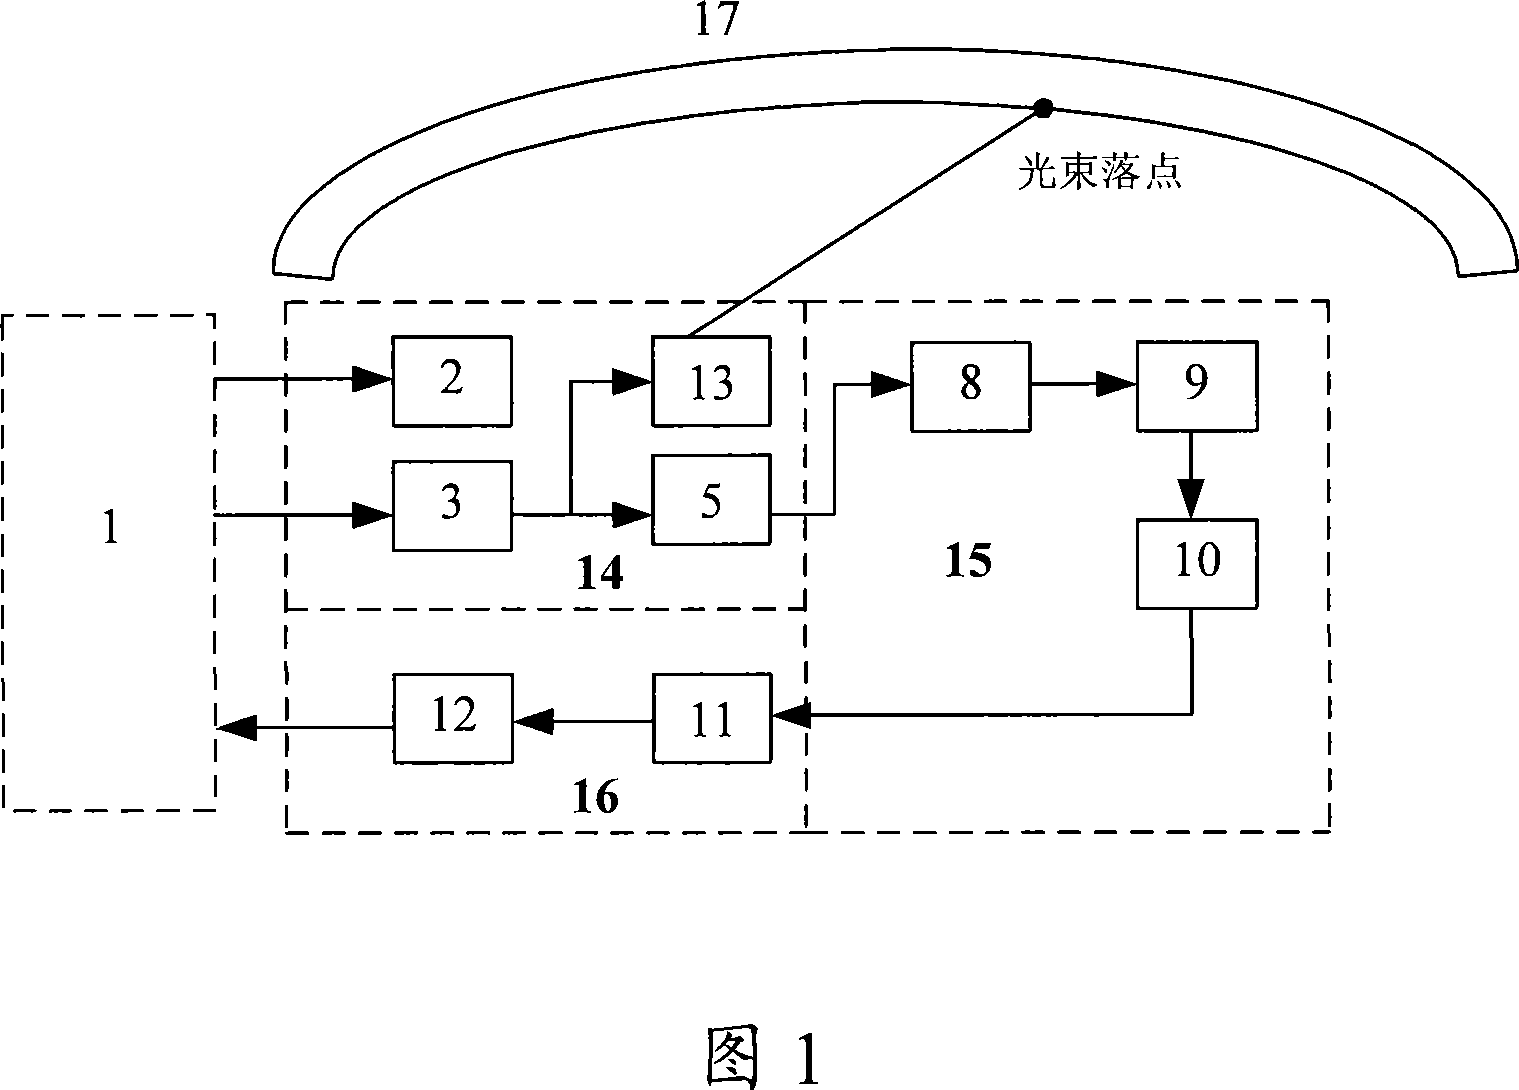 Distant view orienting enquiring display apparatus and method